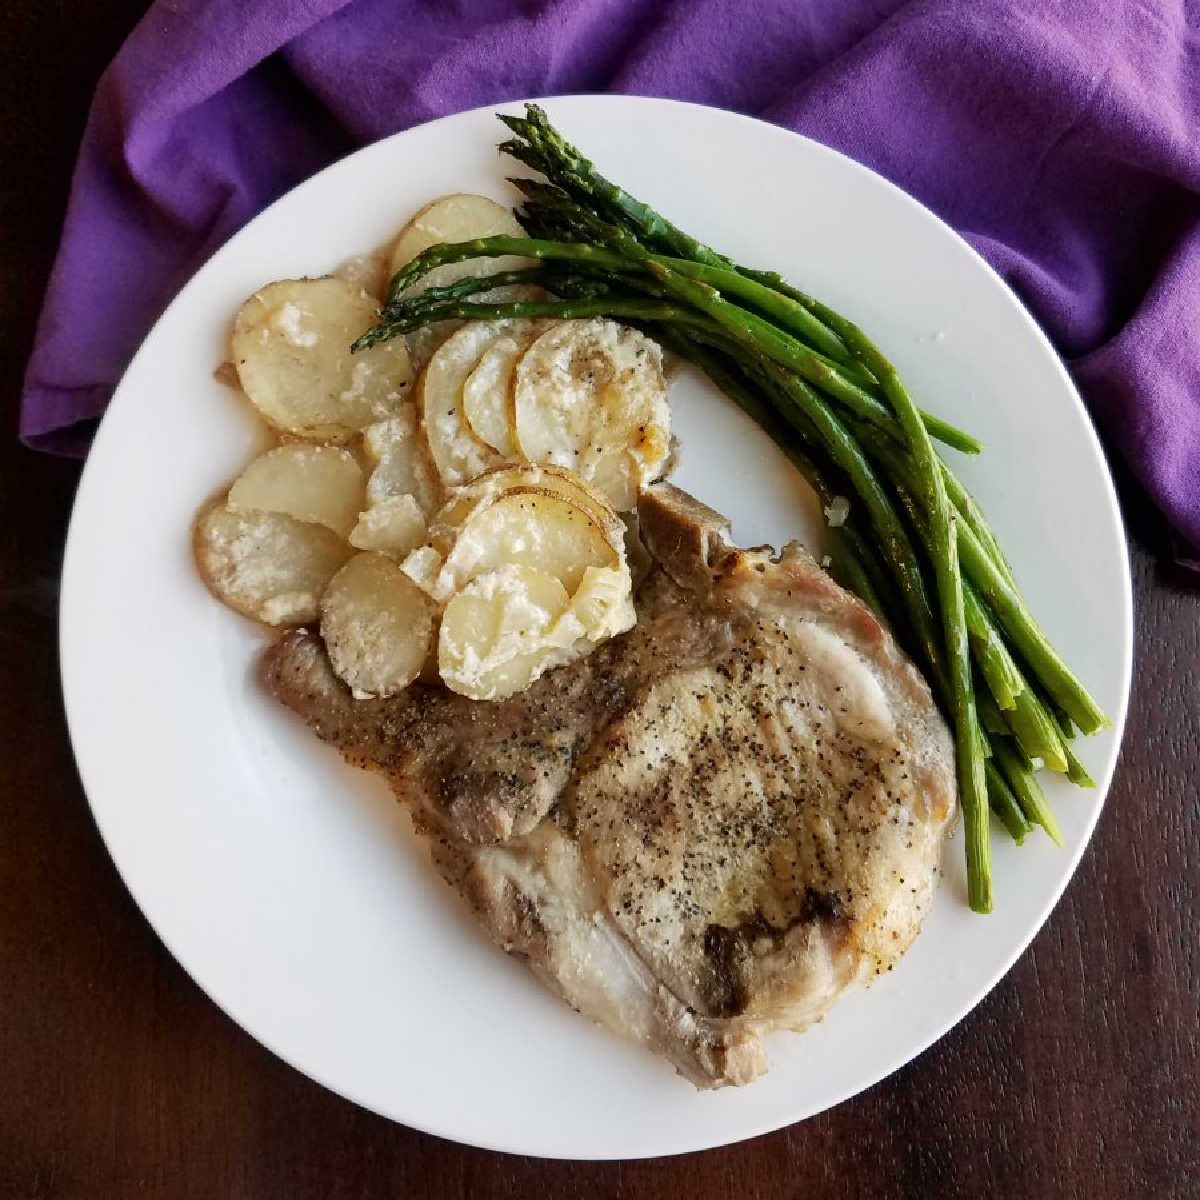 Dinner plate with scalloped potatoes, a pork chop and asparagus ready to eat.